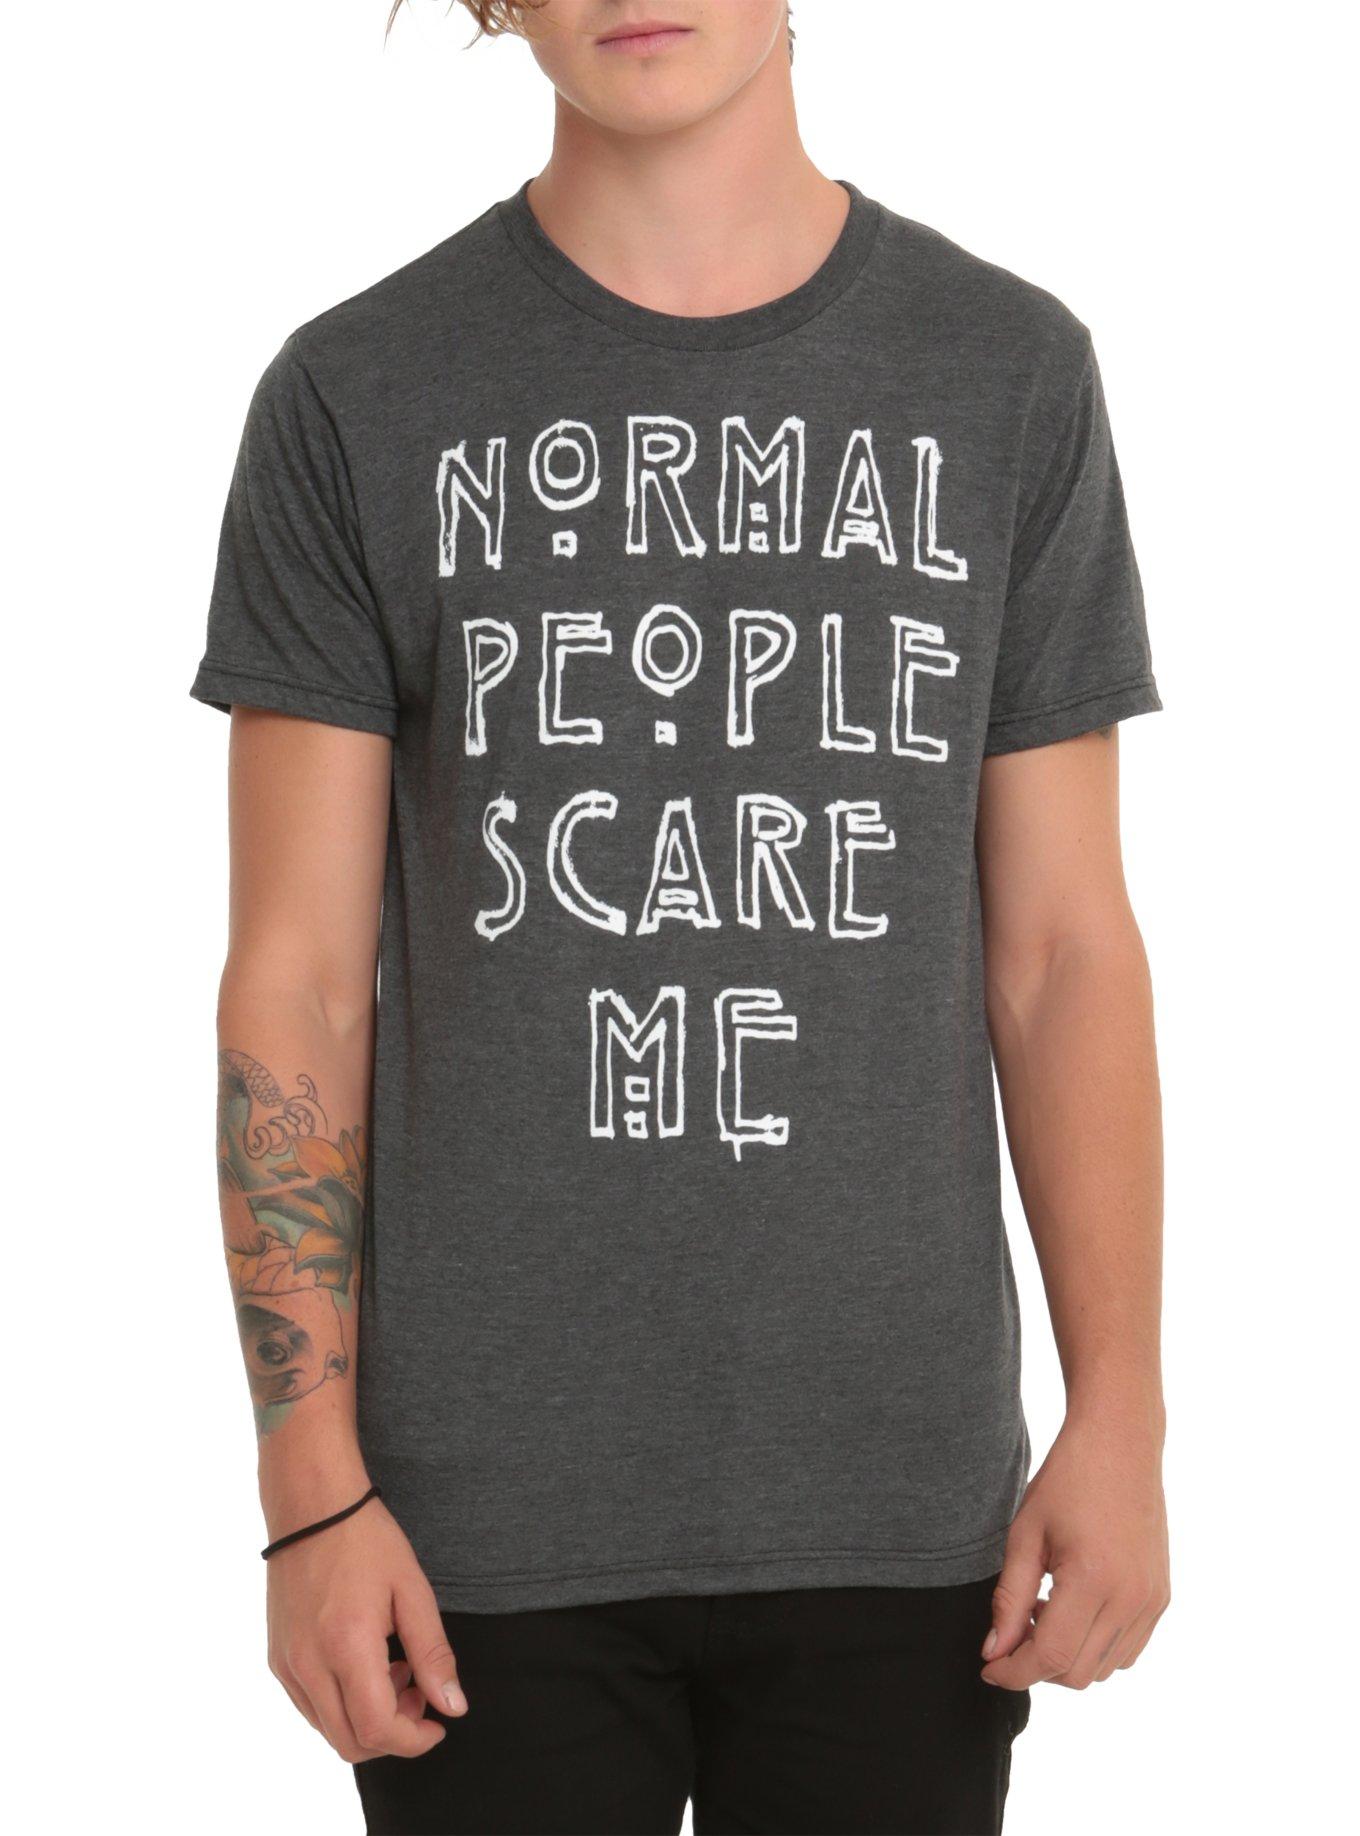 normal people scare me shirt american horror story